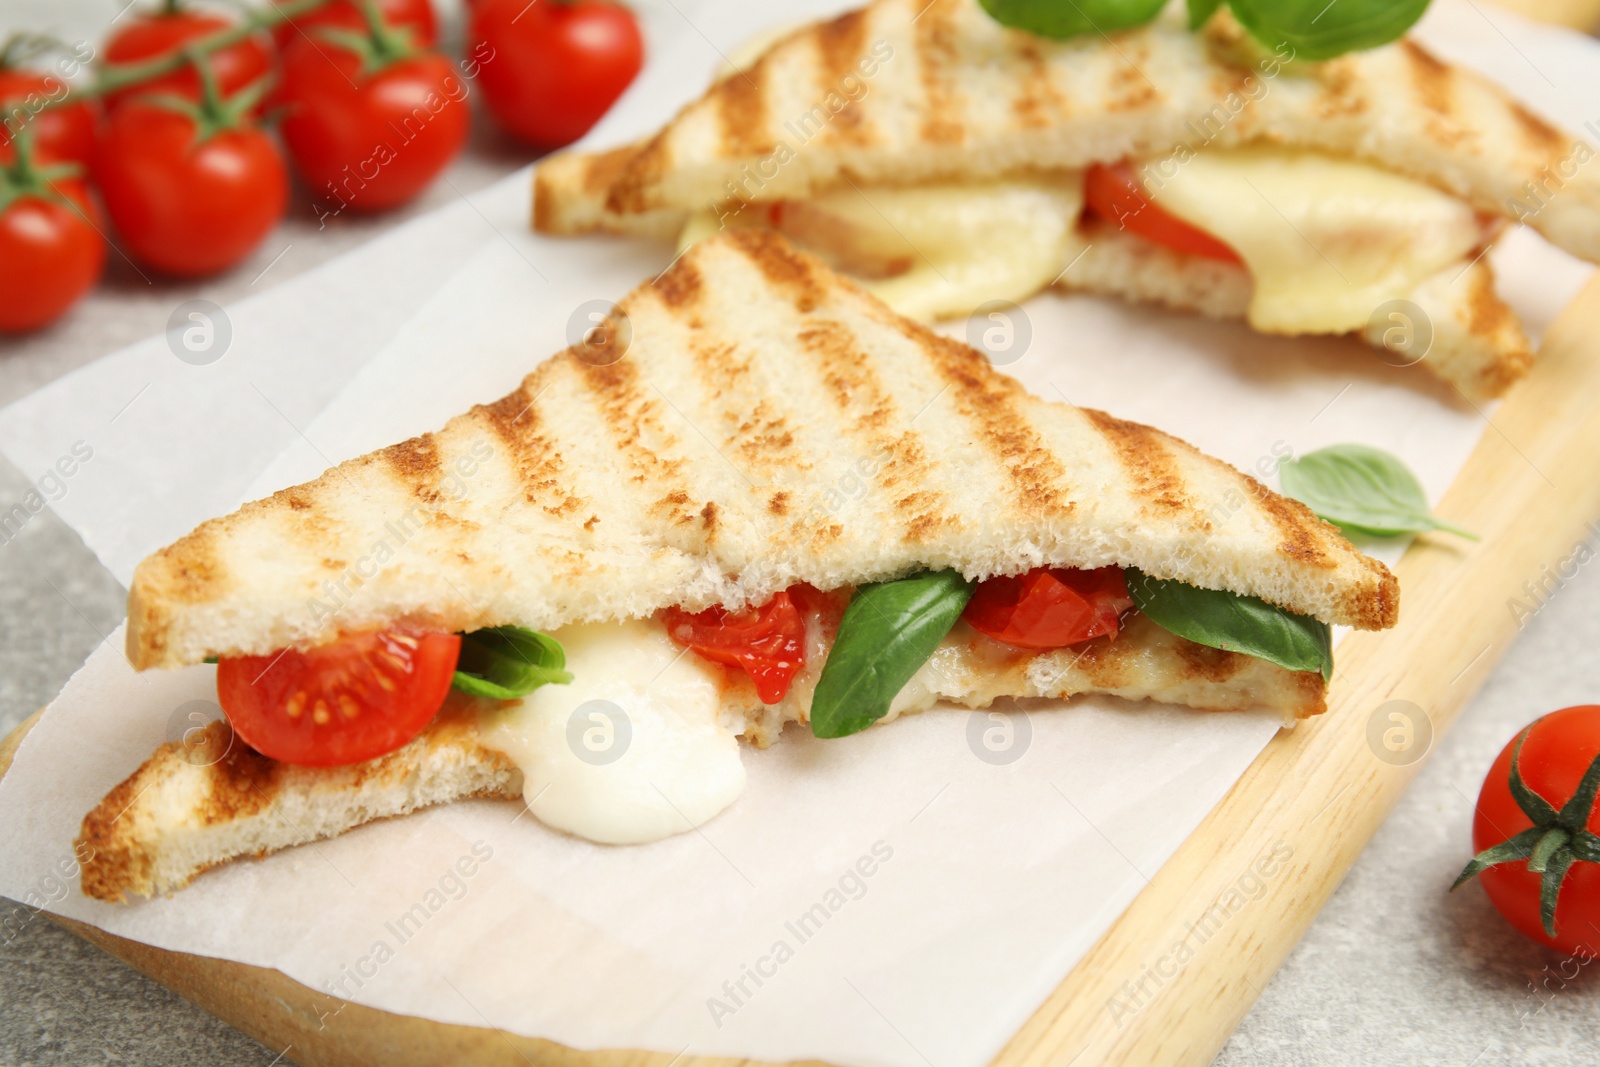 Photo of Delicious grilled sandwiches with mozzarella, tomatoes and basil on wooden board, closeup